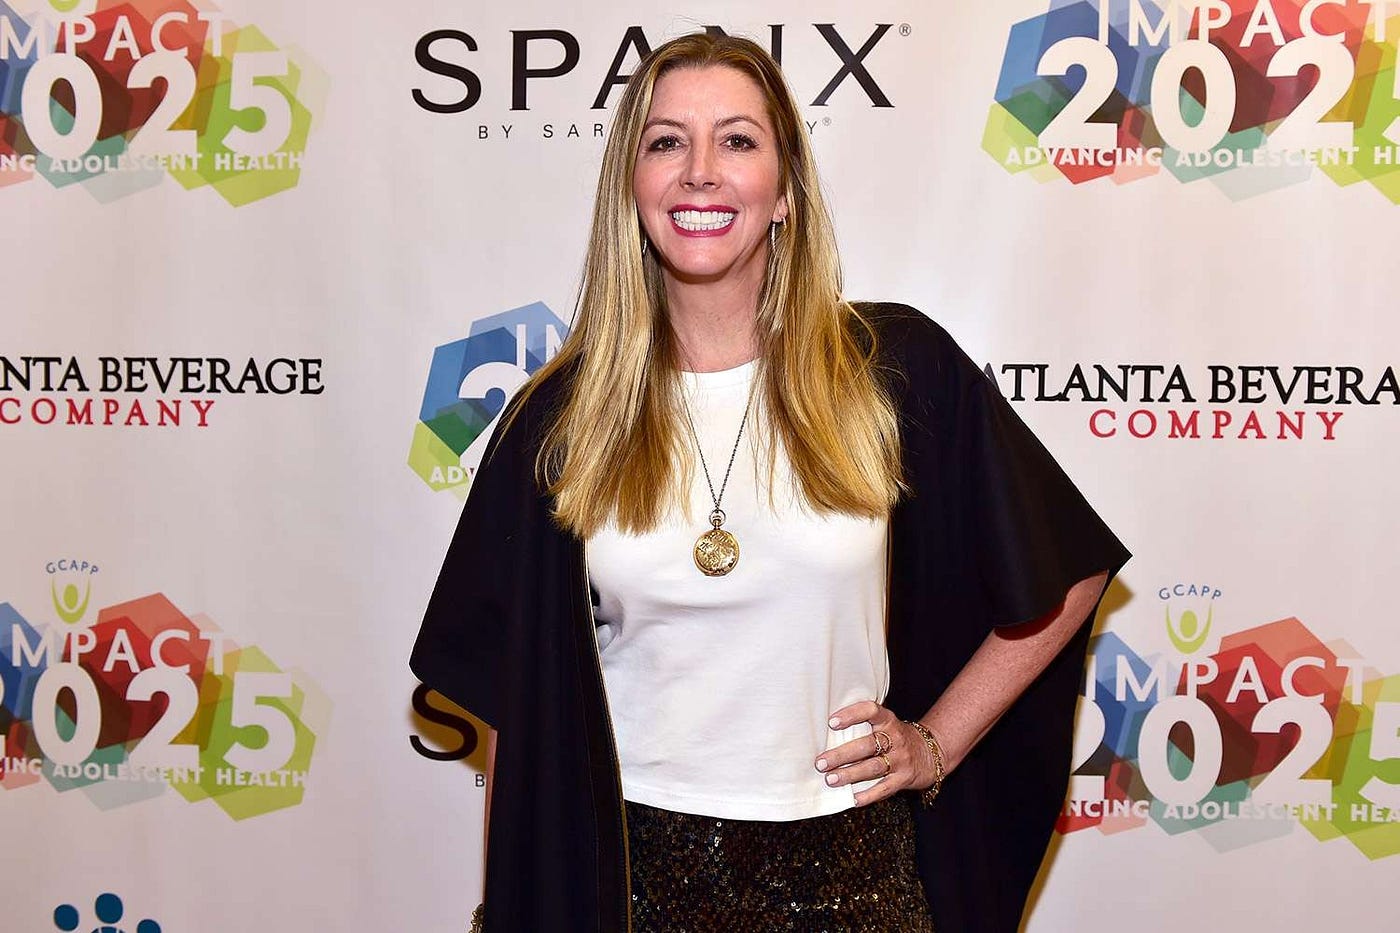 The Spanx Saga: How Sara Blakely Out-Witted Giants in the